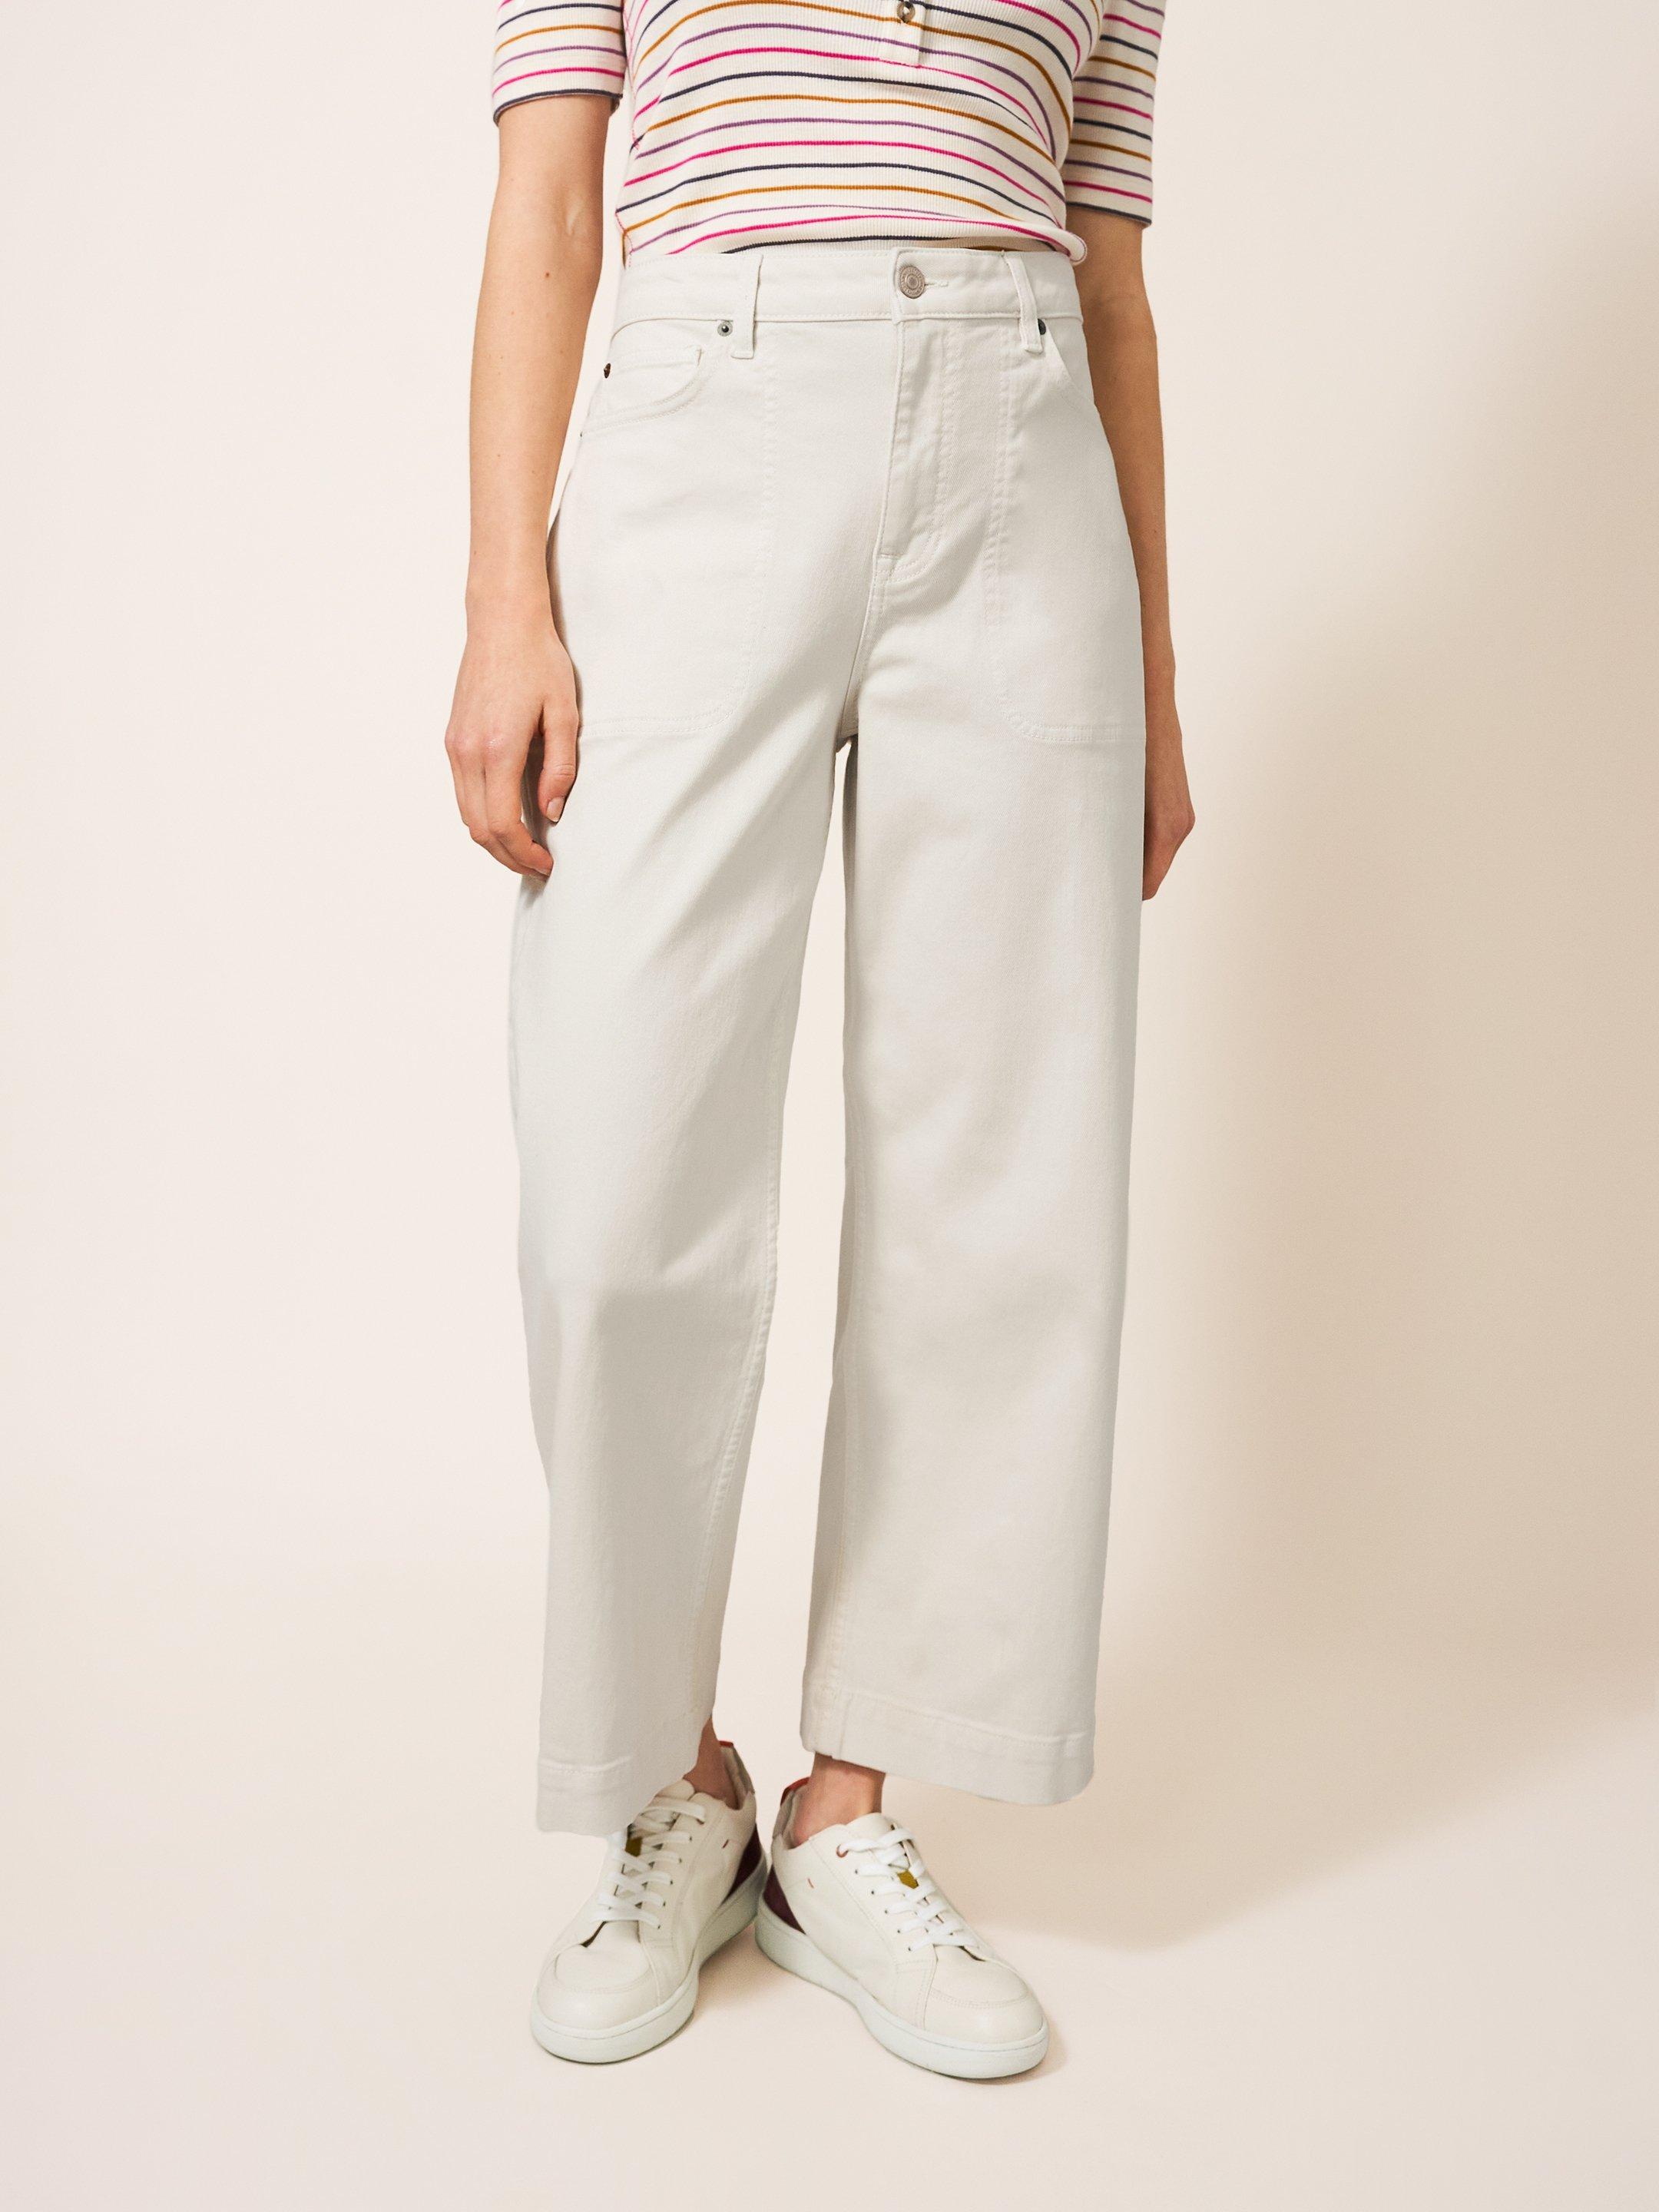 Tia Wide Leg Cropped Jean in LGT NAT - MODEL FRONT